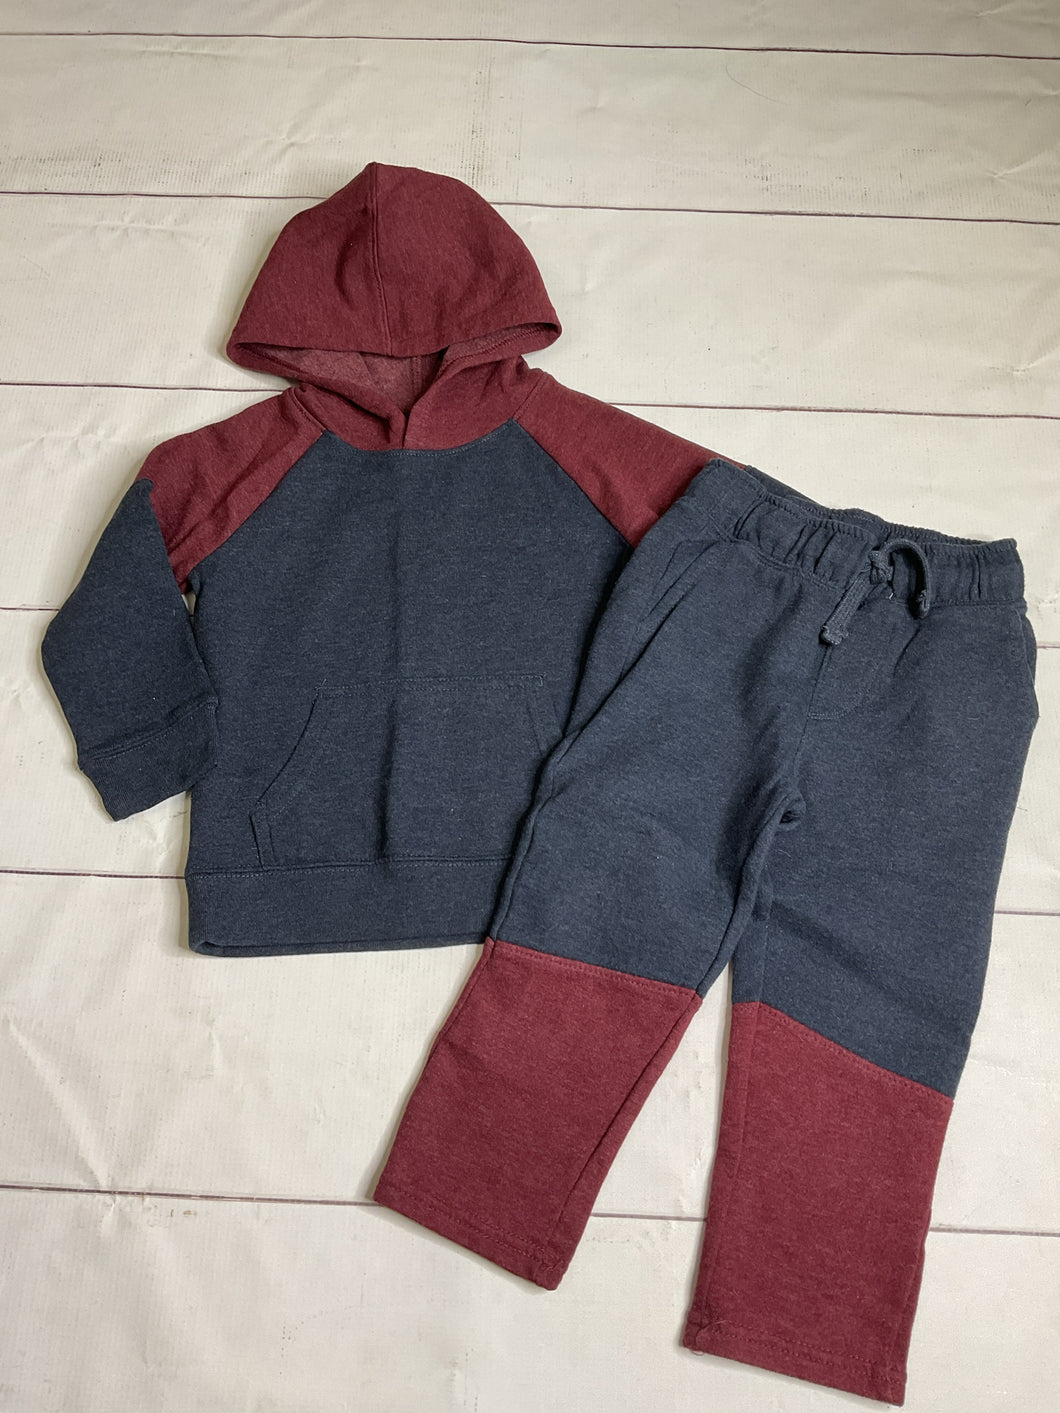 Cat & Jack Size 3 2pc. Outfit